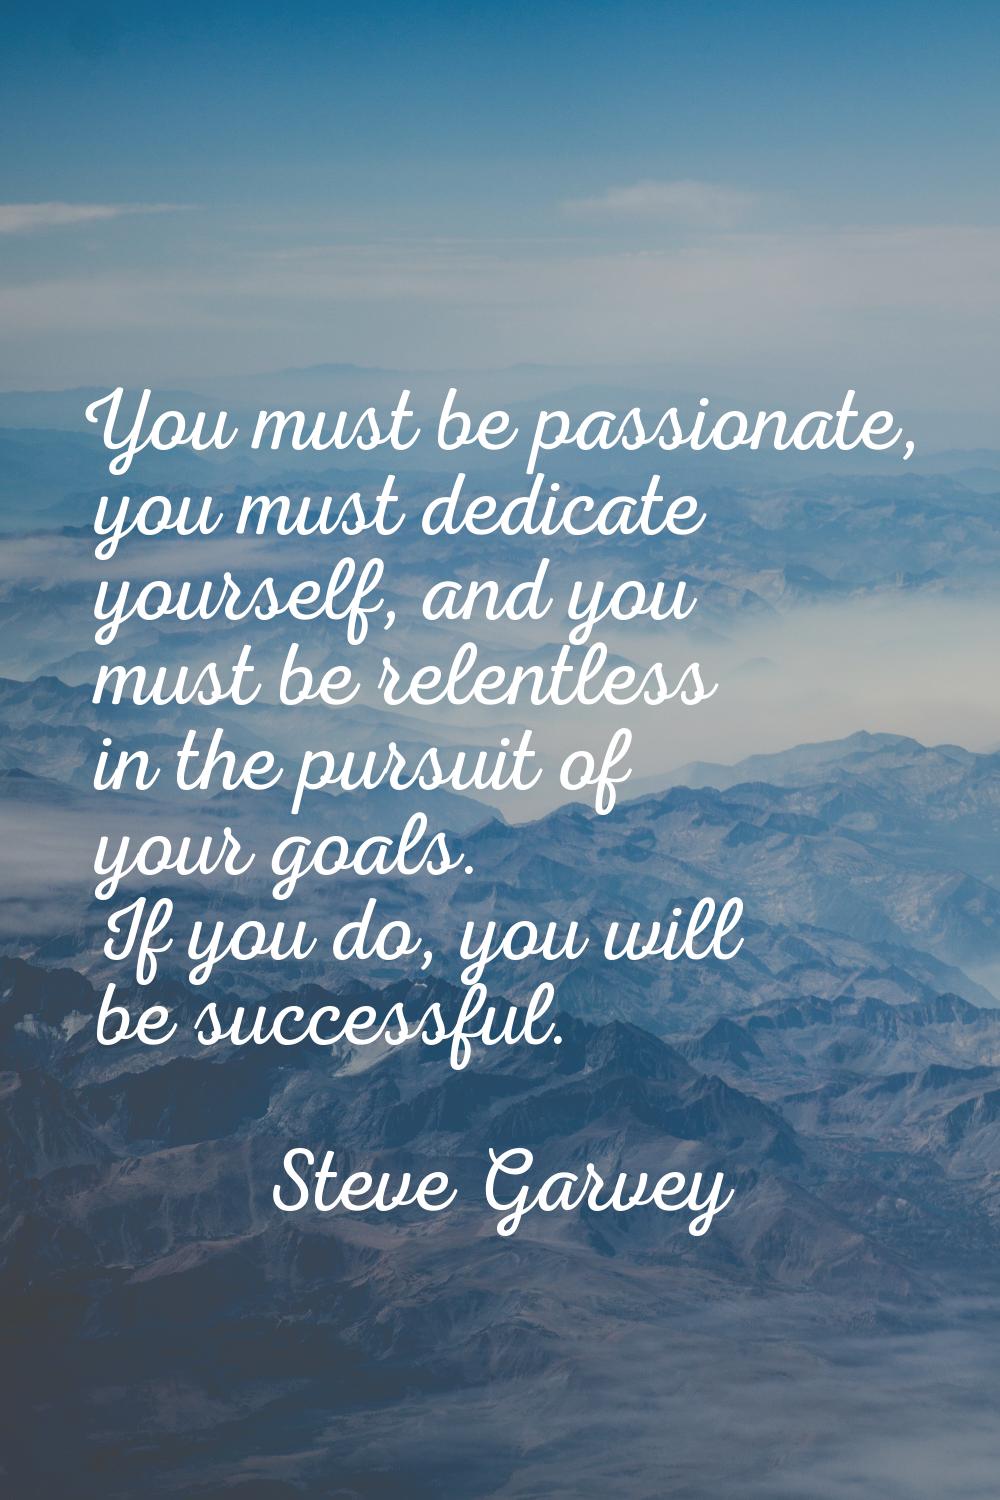 You must be passionate, you must dedicate yourself, and you must be relentless in the pursuit of yo